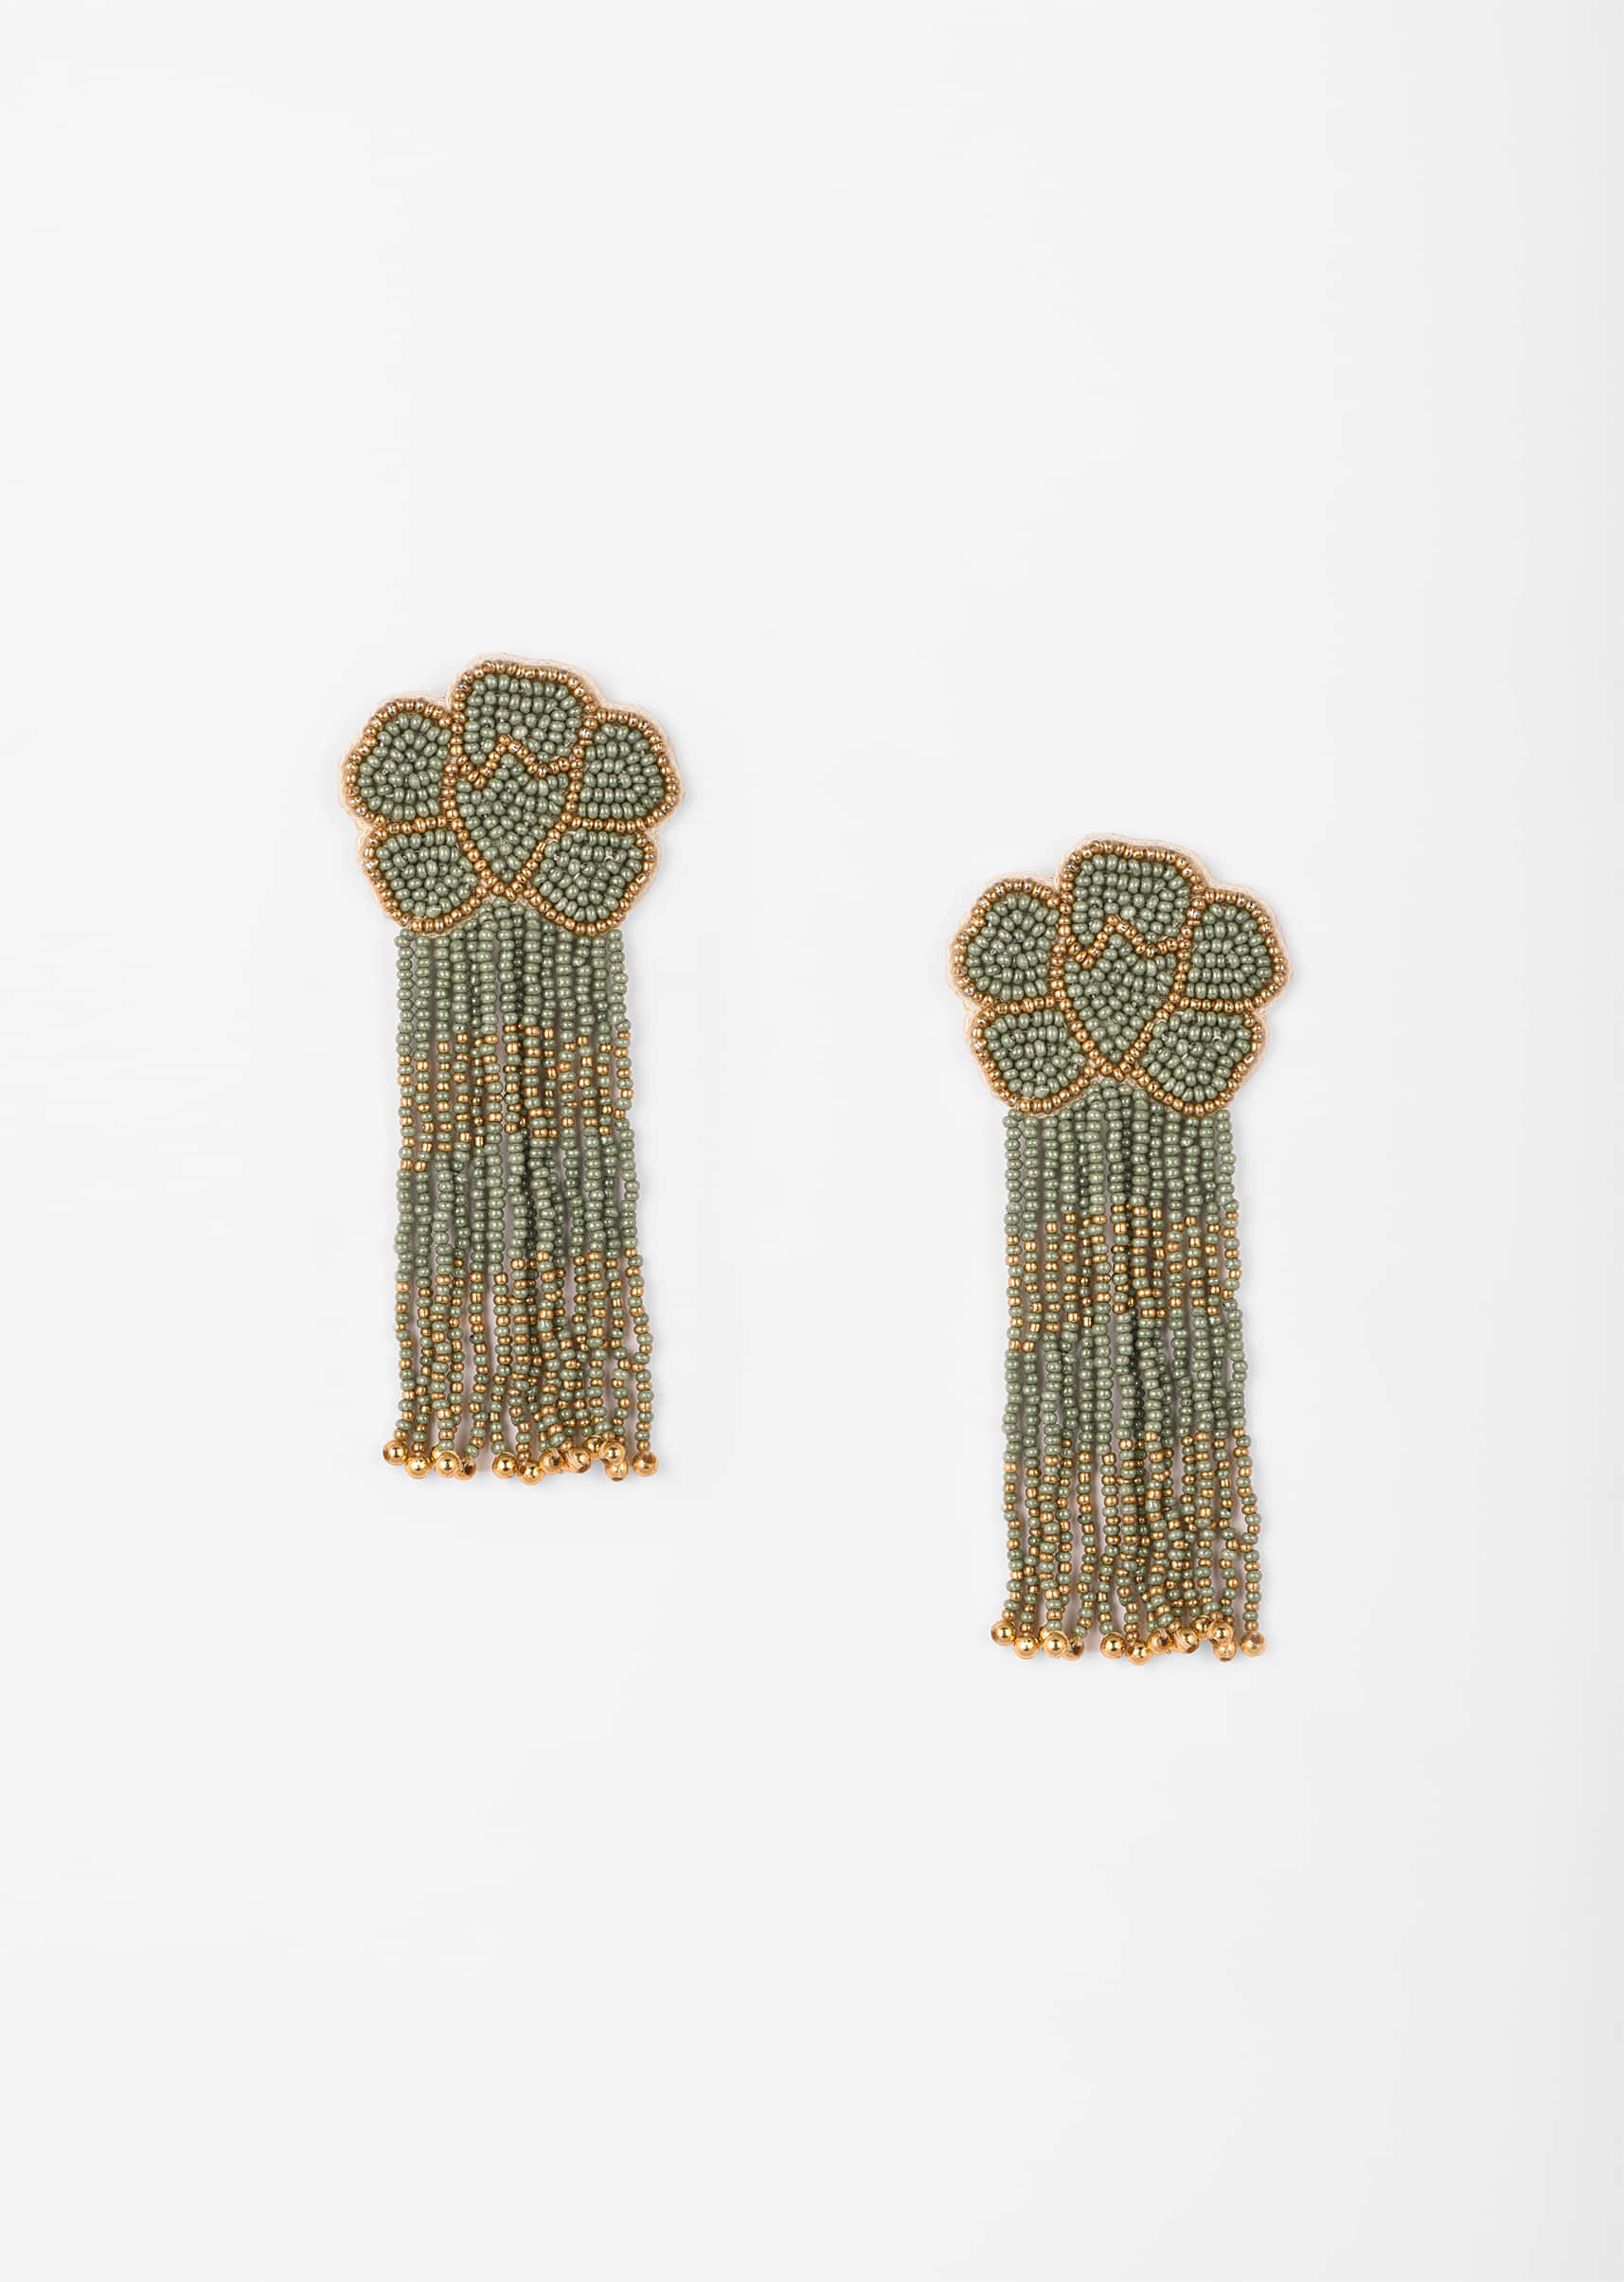 Green And Gold Earrings With Beads Work In Floral Motifs And Fringe Detail 